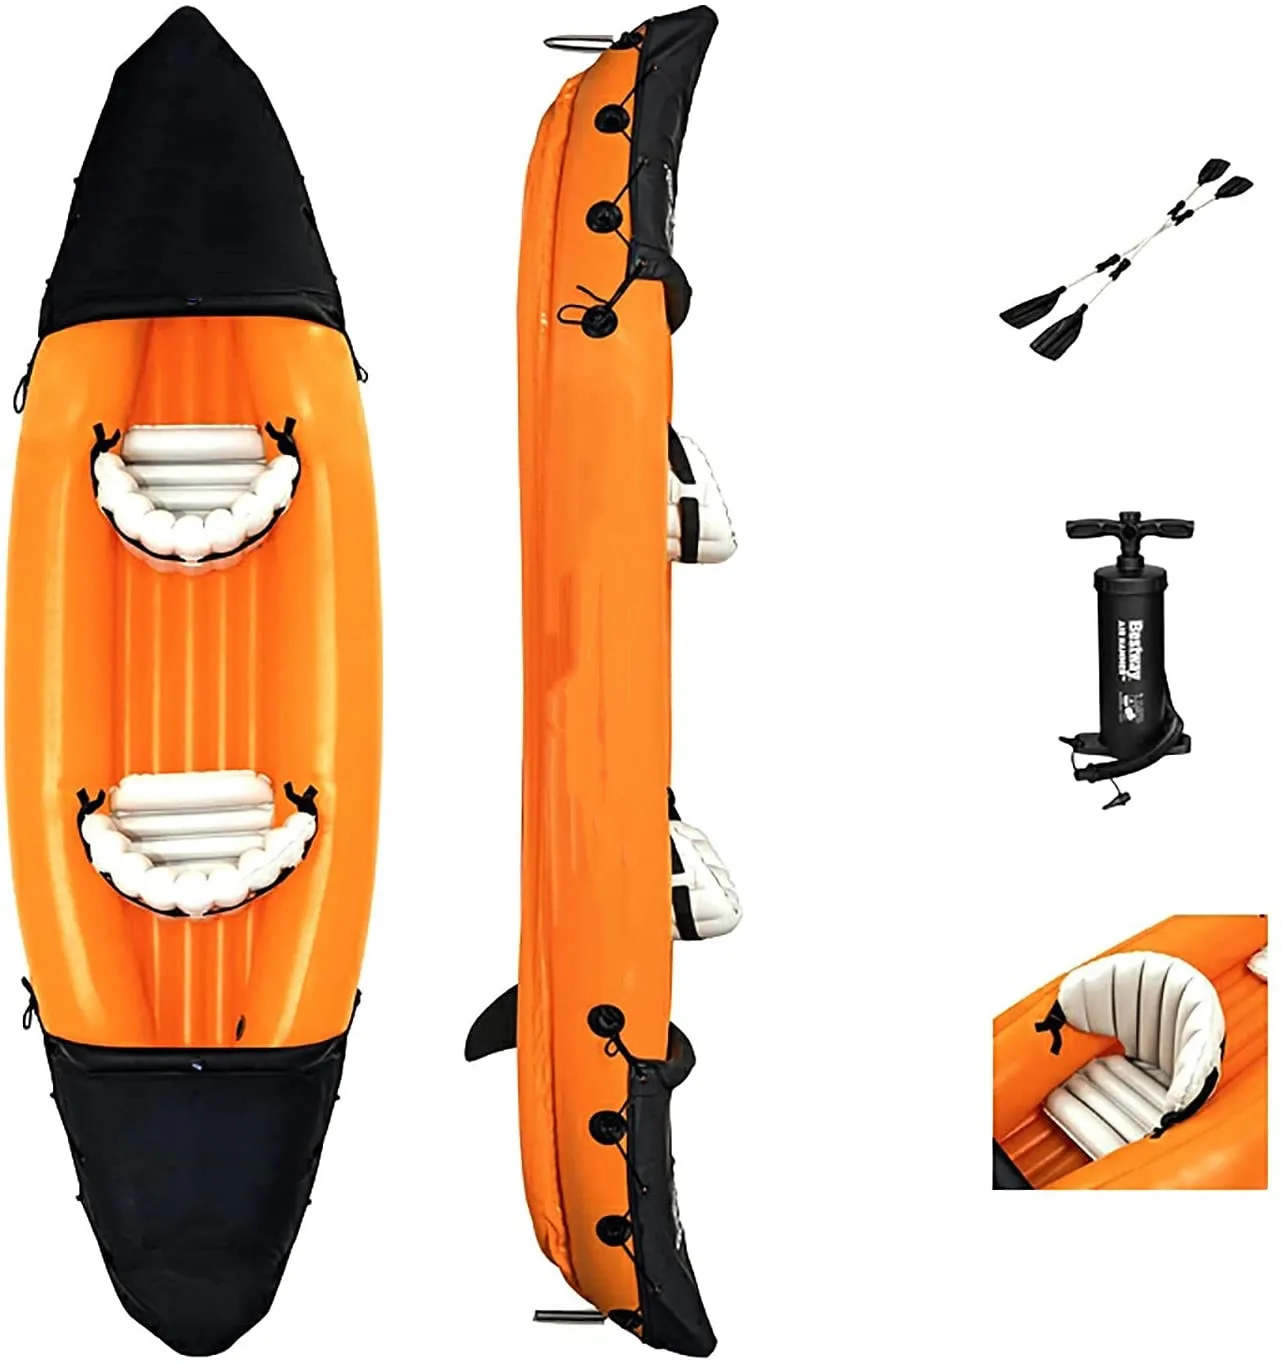 Inflatable canoe/kayak for 2 Person Kayaks for adults and Kids Portable Touring Set with two Paddles and Output Air Pump (1600300579006)